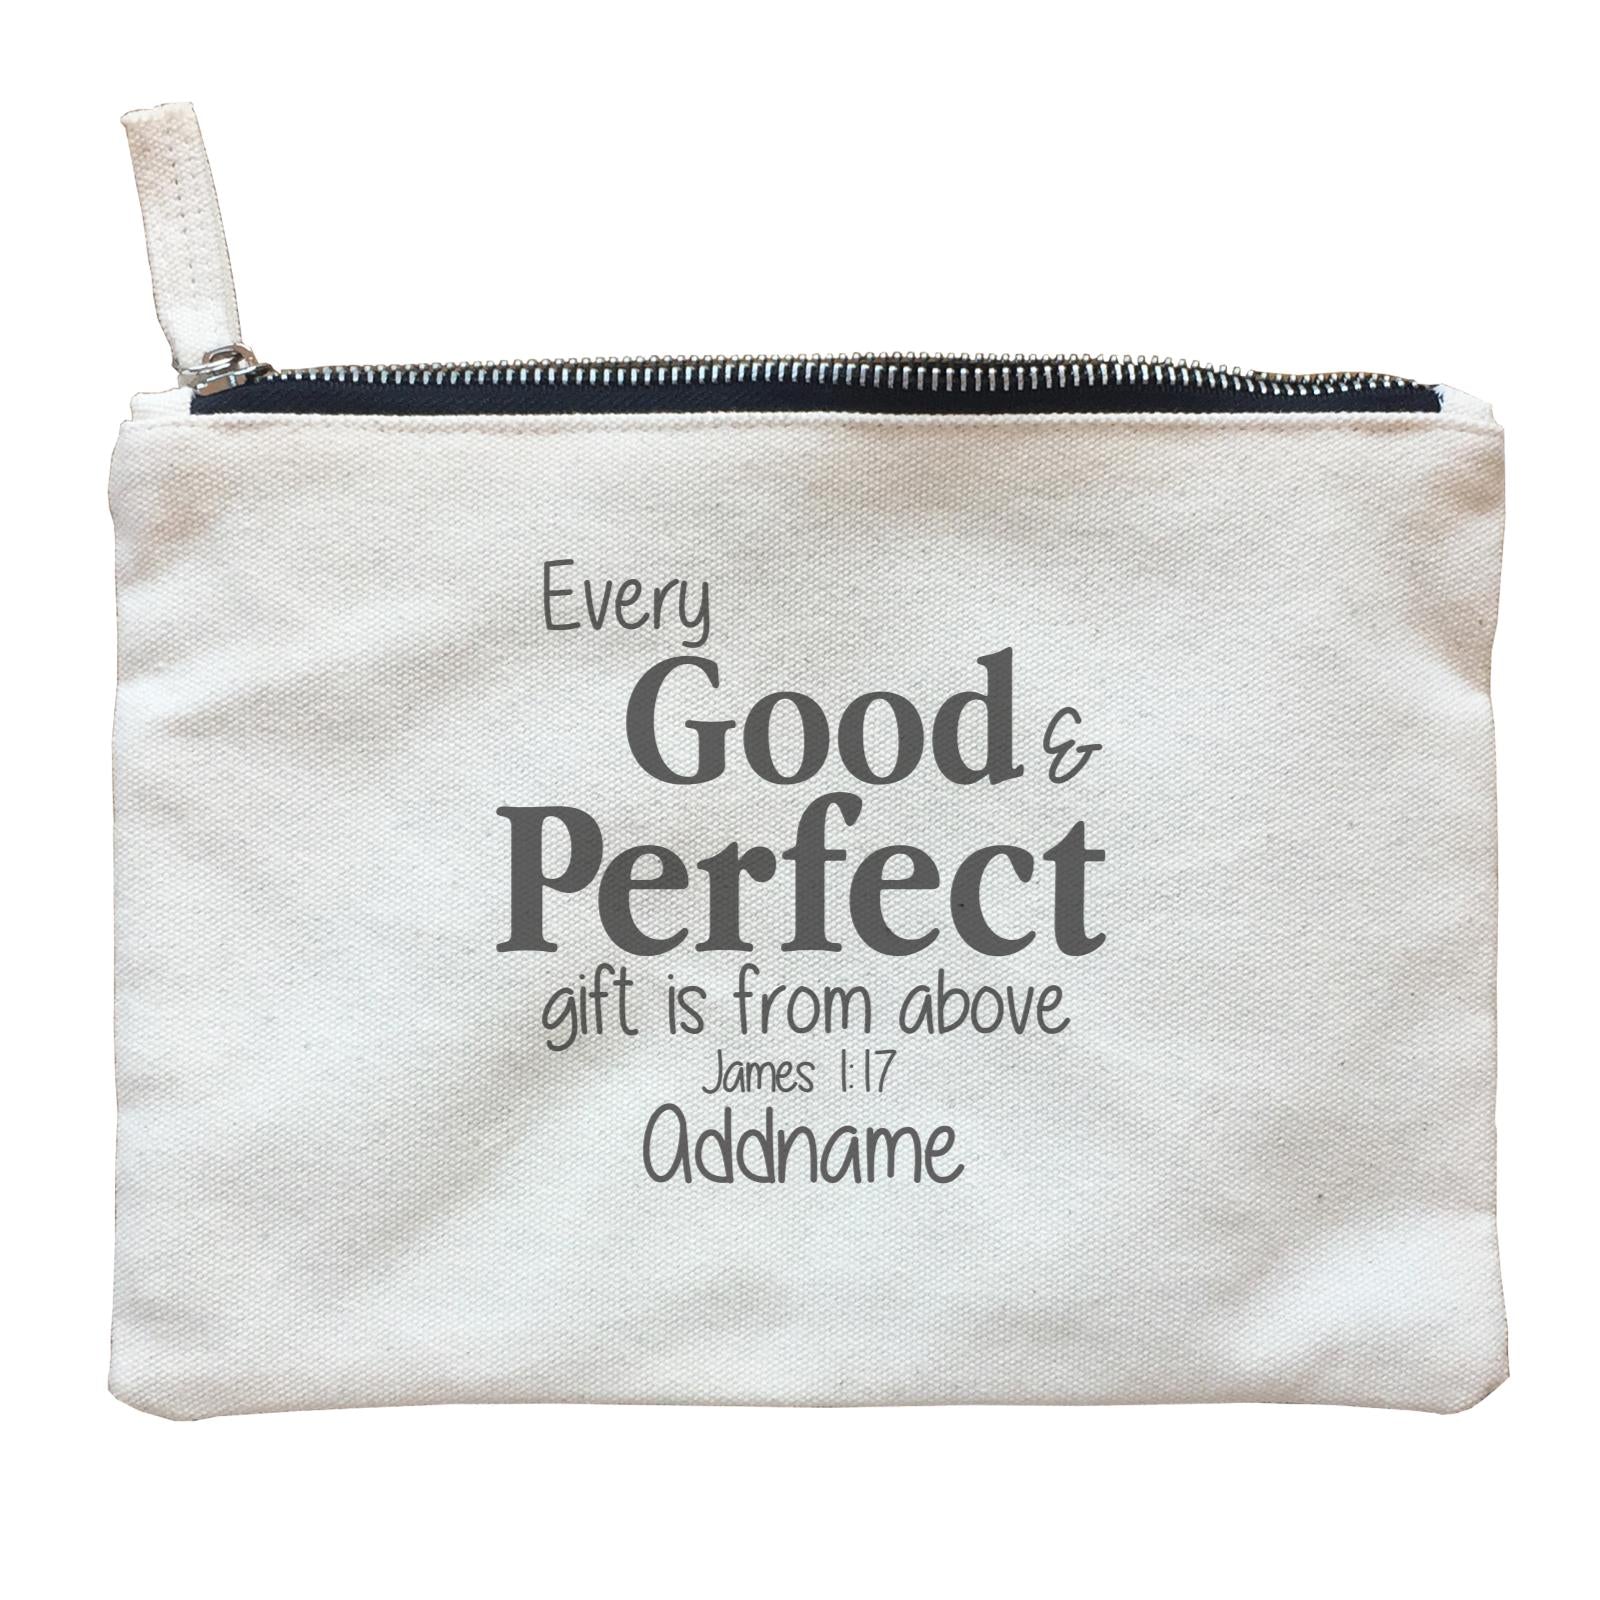 Christ Newborn Every Good and Perfect Gift is from Above James 1.17 Addname Zipper Pouch